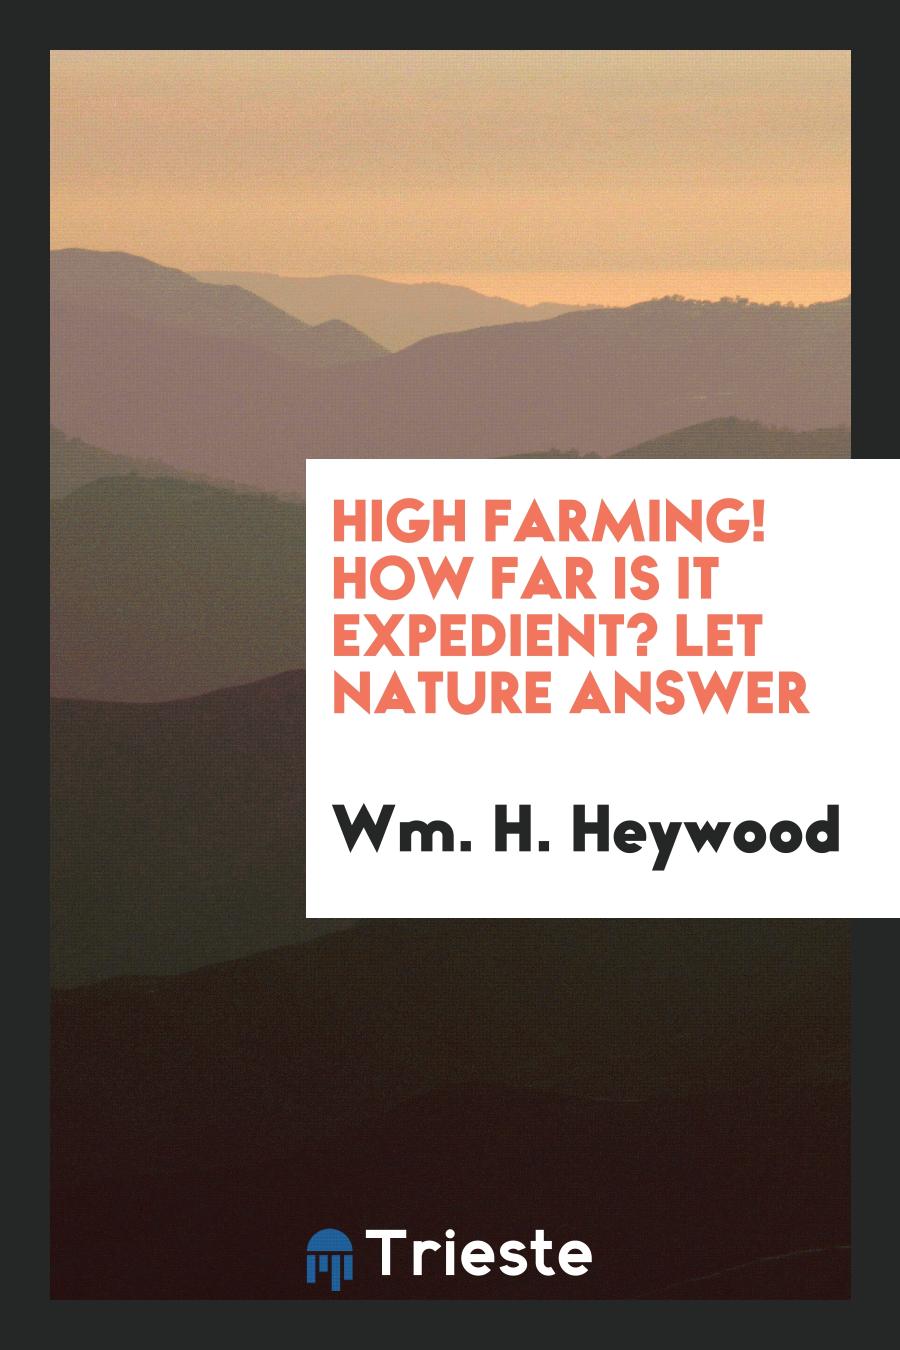 High farming! How far is it expedient? Let nature answer